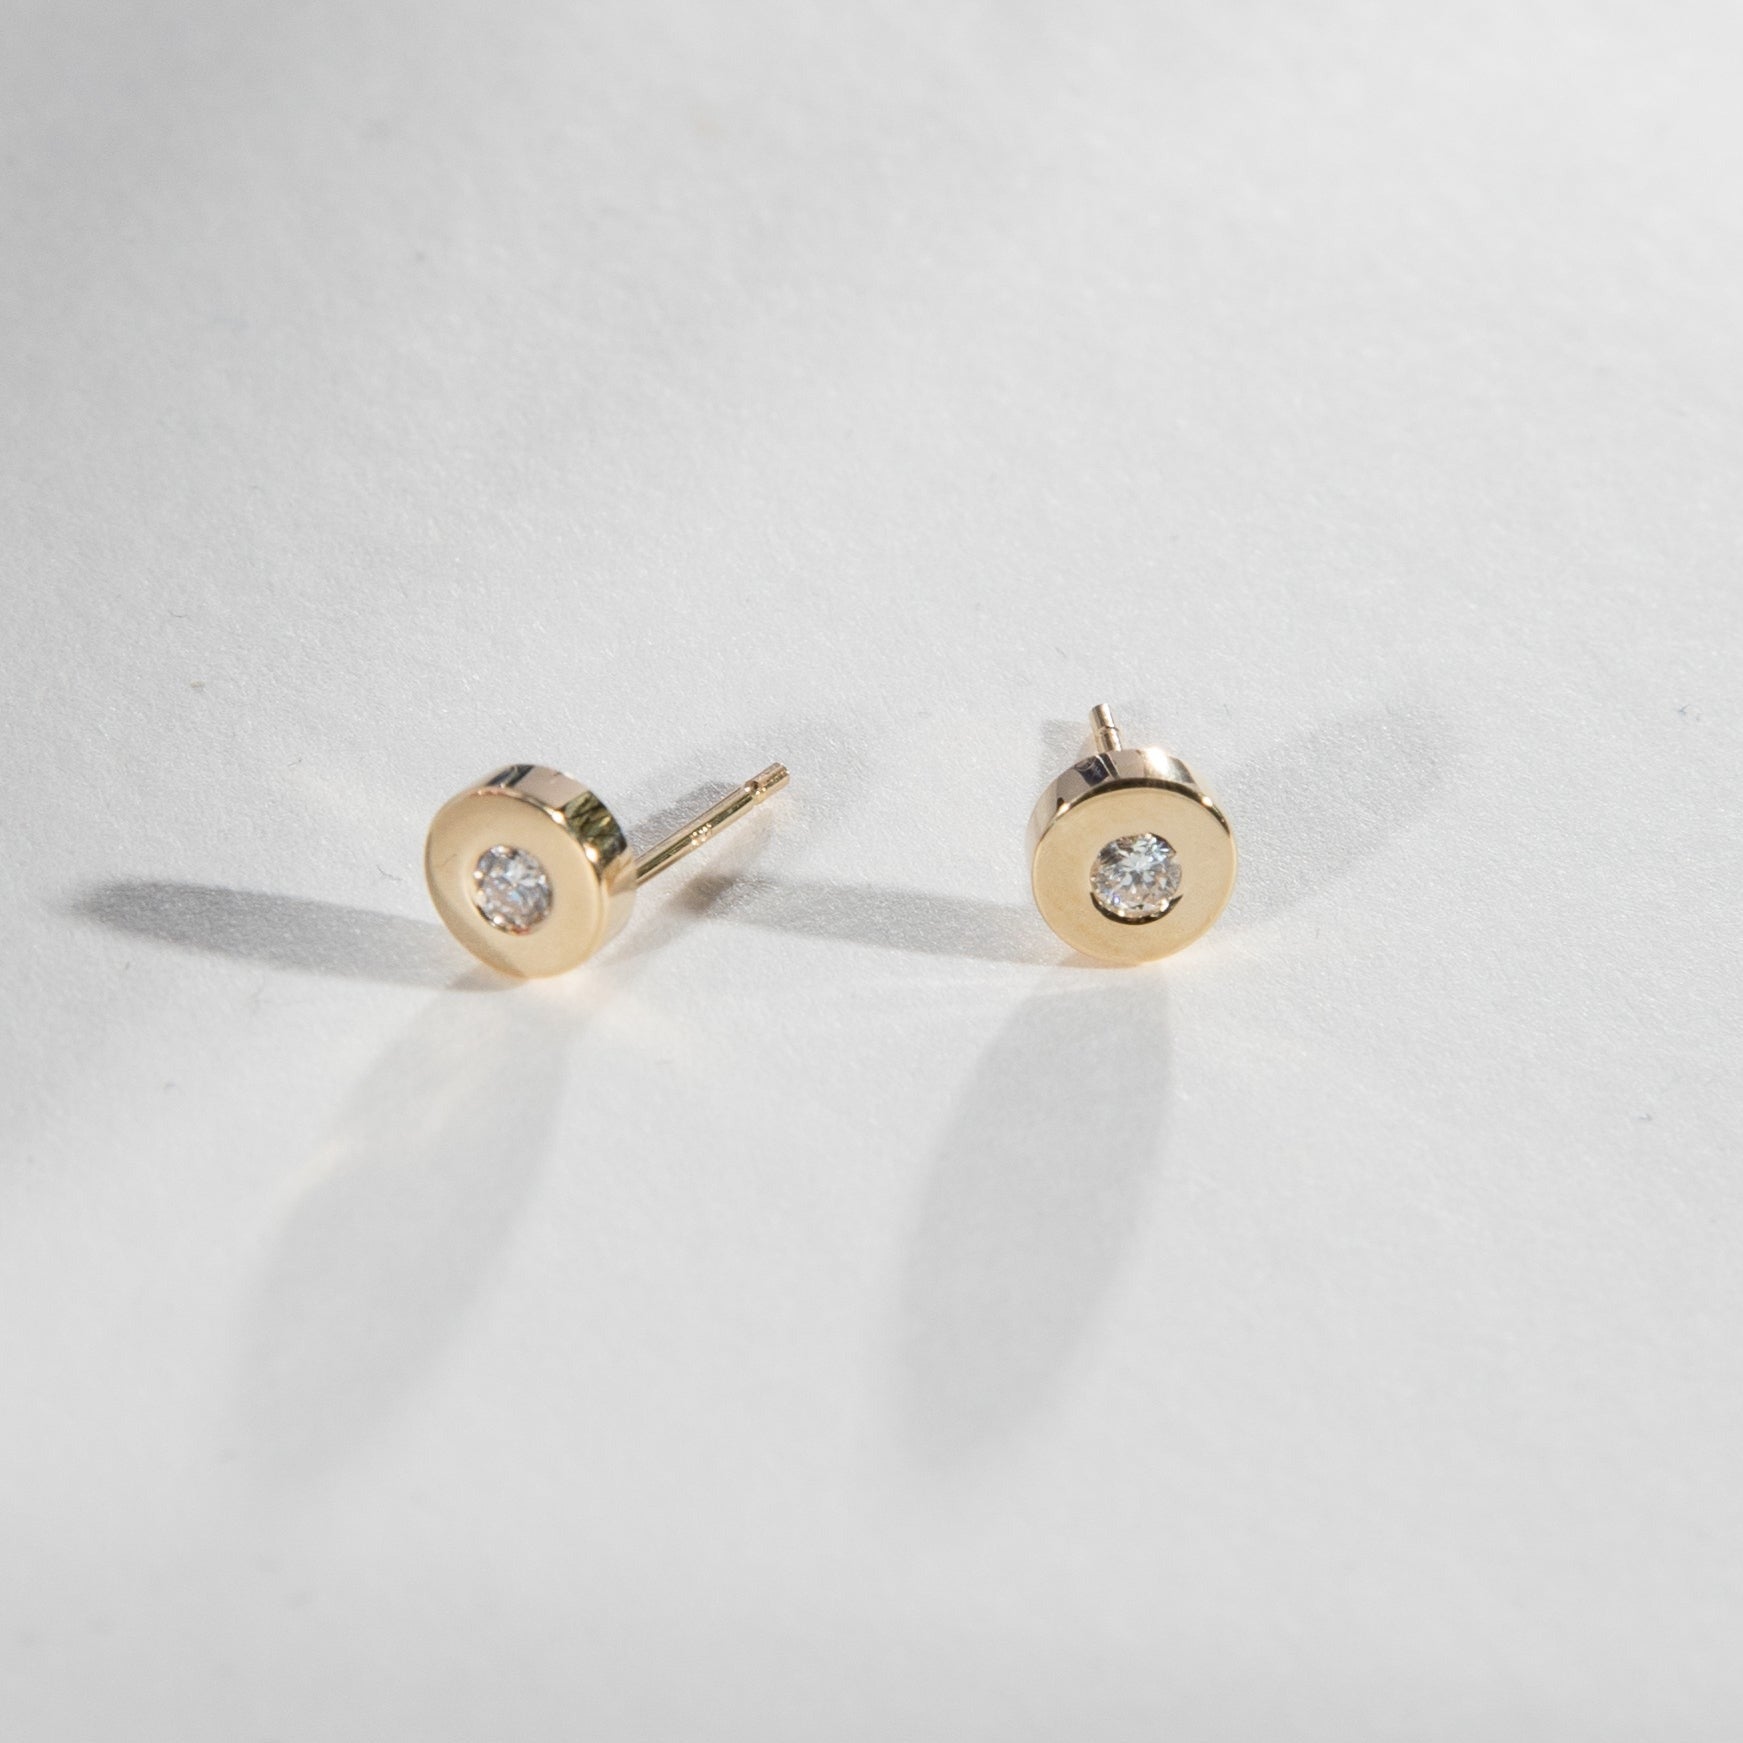 Shara Minimal Earrings in 14k Gold set with lab-grown diamonds By SHW Fine Jewelry NYC